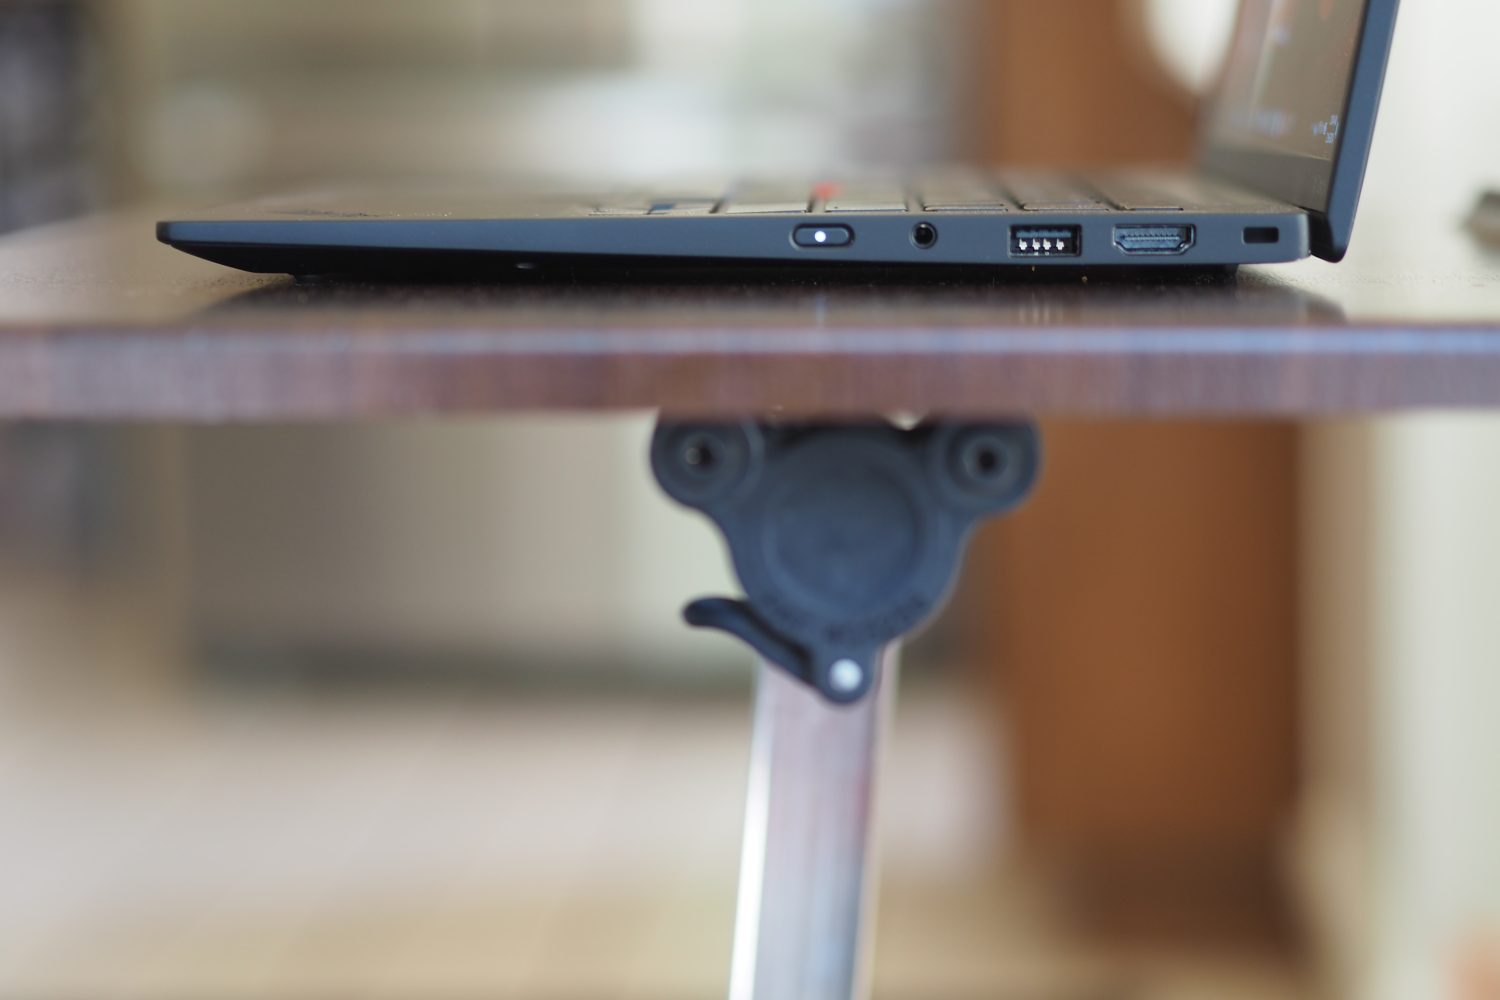 Lenovo ThinkPad X1 Carbon Gen 12 side view showing ports and lid.